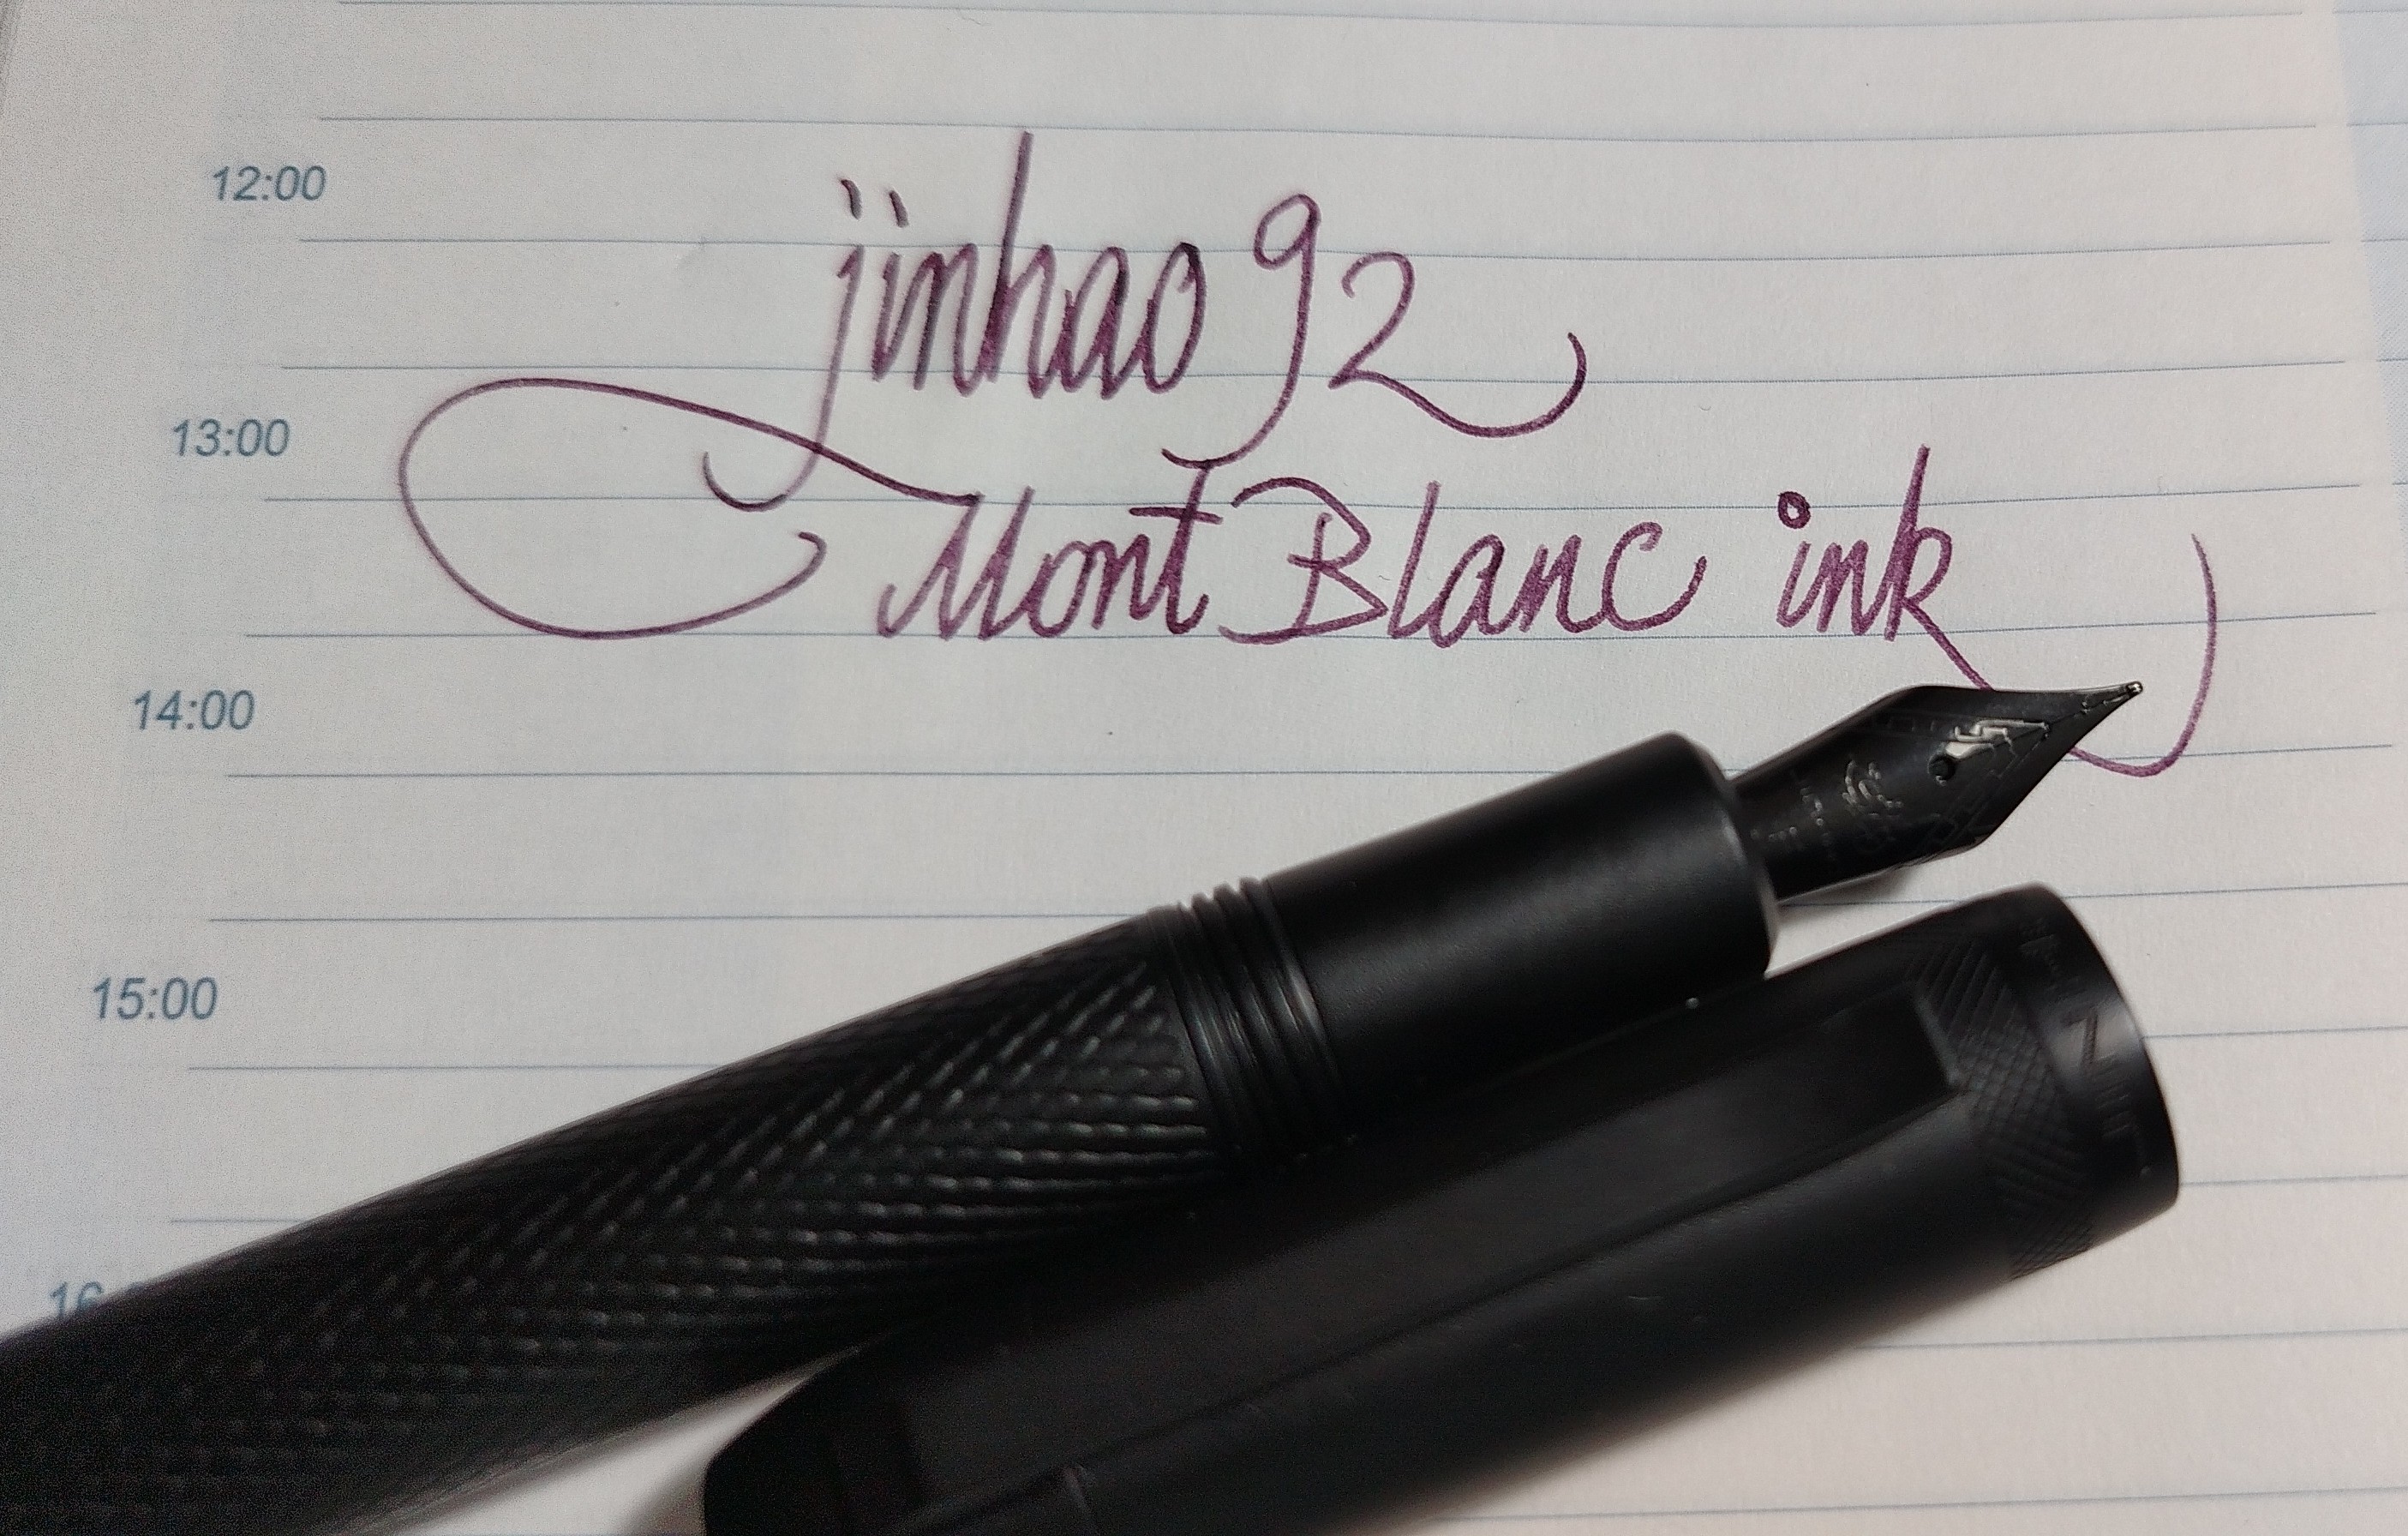 Black metal fountain pen on lined paper. "jinhao 92 Mont Blanc ink" written in italic hand.